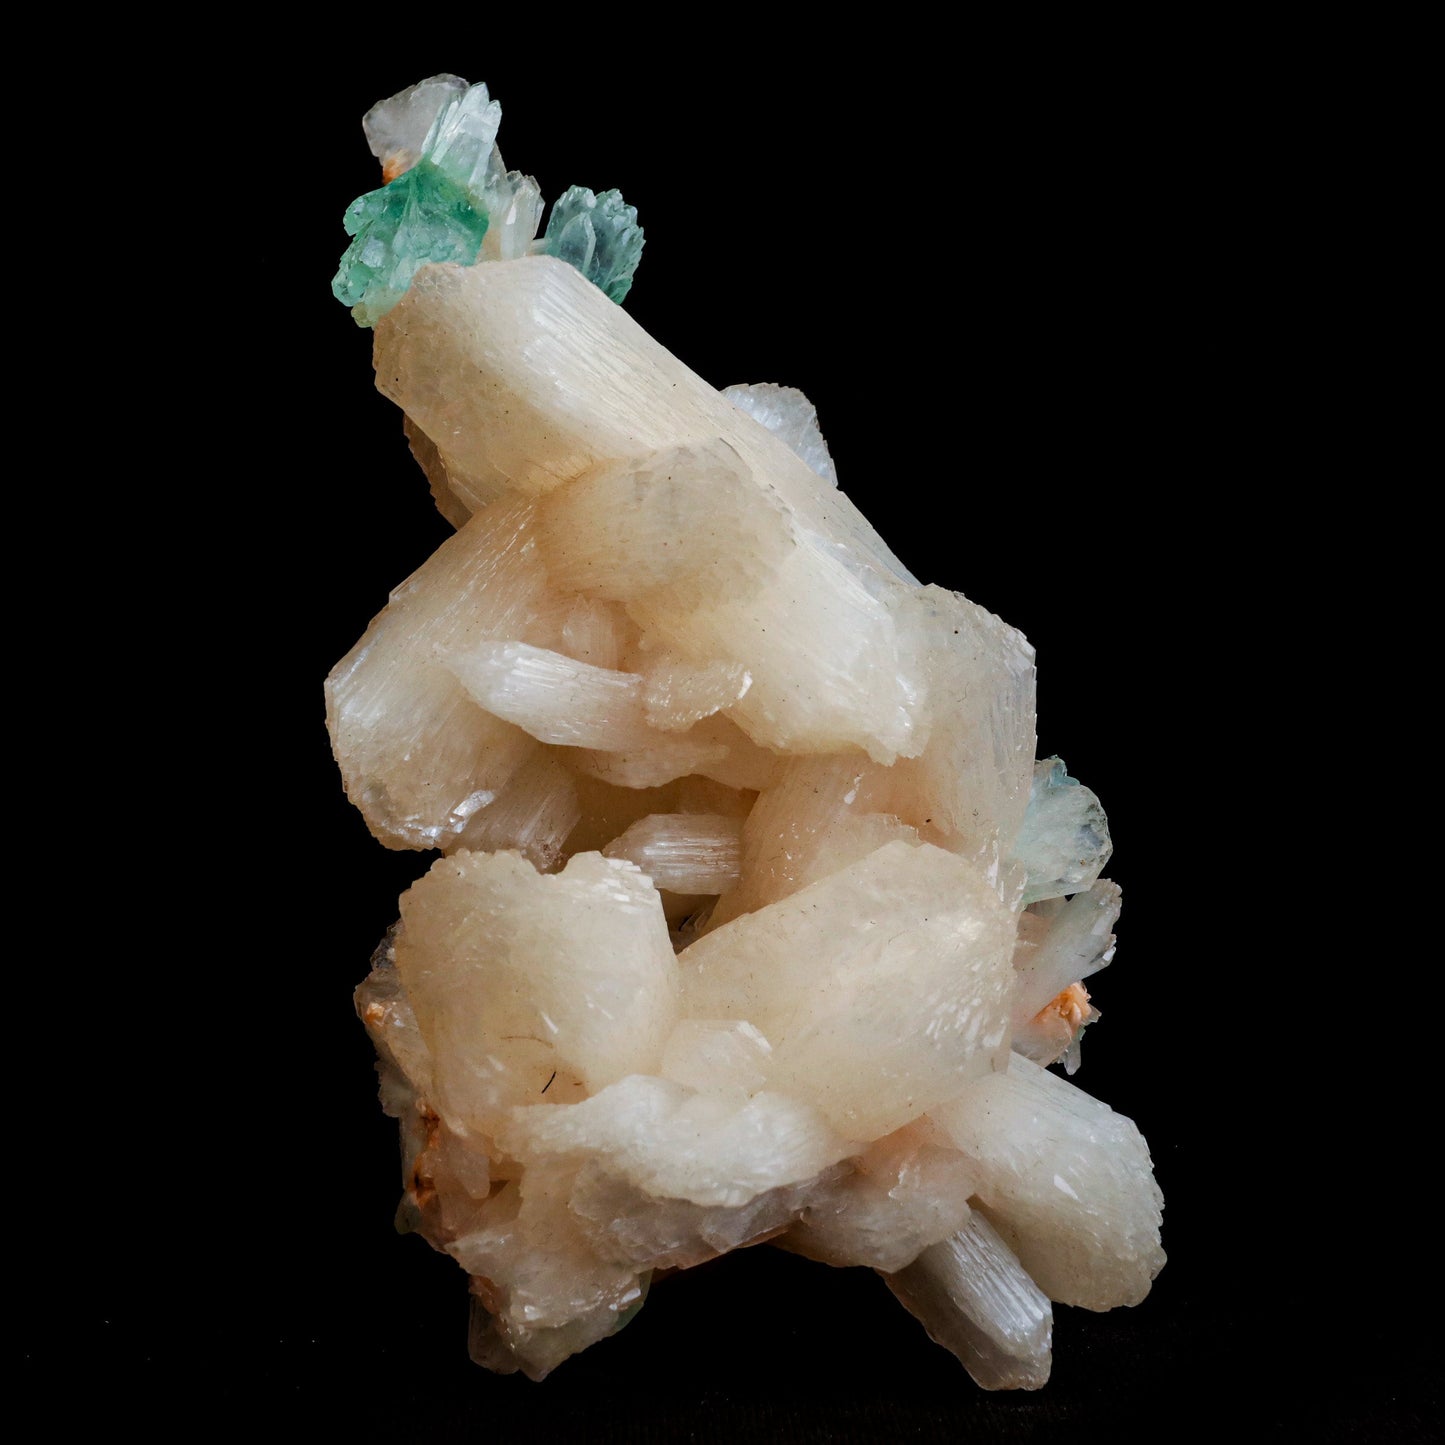 Green Apophyllite with Stilbite Natural Mineral Specimen # B 5056  https://www.superbminerals.us/products/green-apophyllite-with-stilbite-natural-mineral-specimen-b-5056  Features: Transparent green apophyllite crystals long with lustrous crystal faces and steep pyramidal terminations on matrix coated with lustrous peach-baggie coloured Stilbite crystals of 